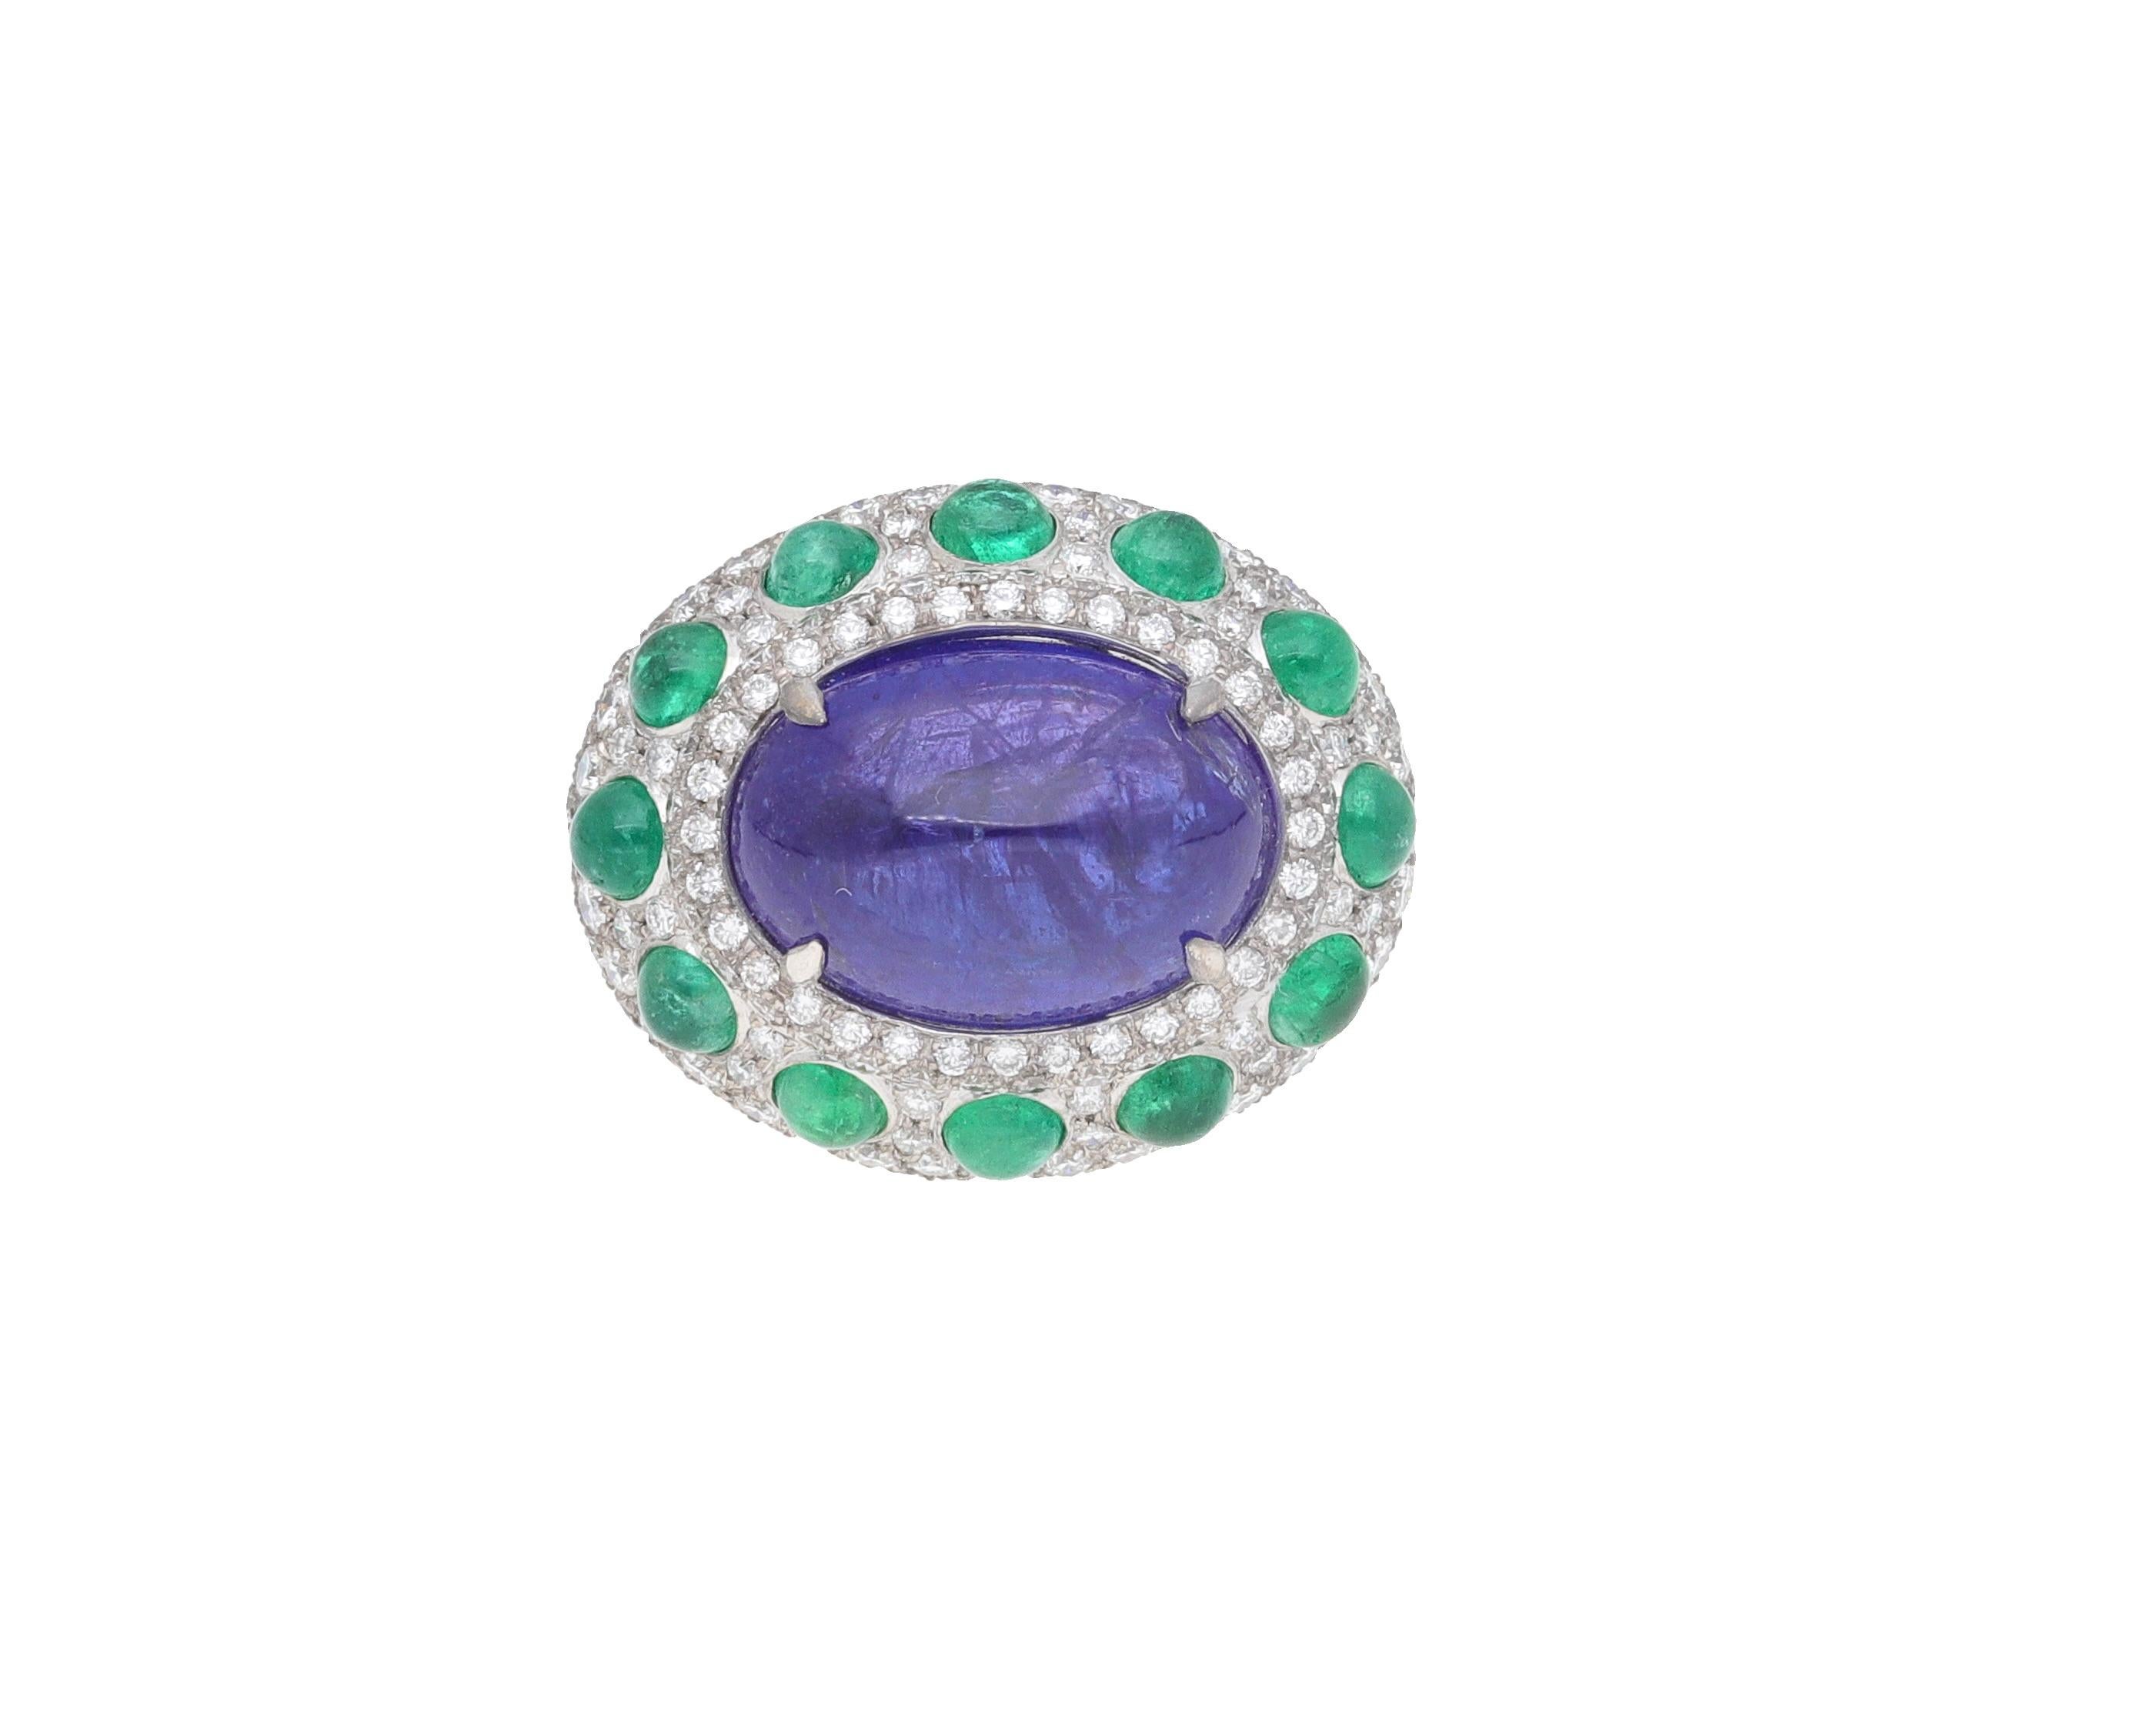 Handcrafted ring made in Italy of 18 kt. white gold with diamonds, emeralds and tanzanite.
This ring from the Queen Fraleoni Collection is made with a pavé of diamonds surrounding the central tanzanite cabochon.
Cabochon emeralds are inserted into